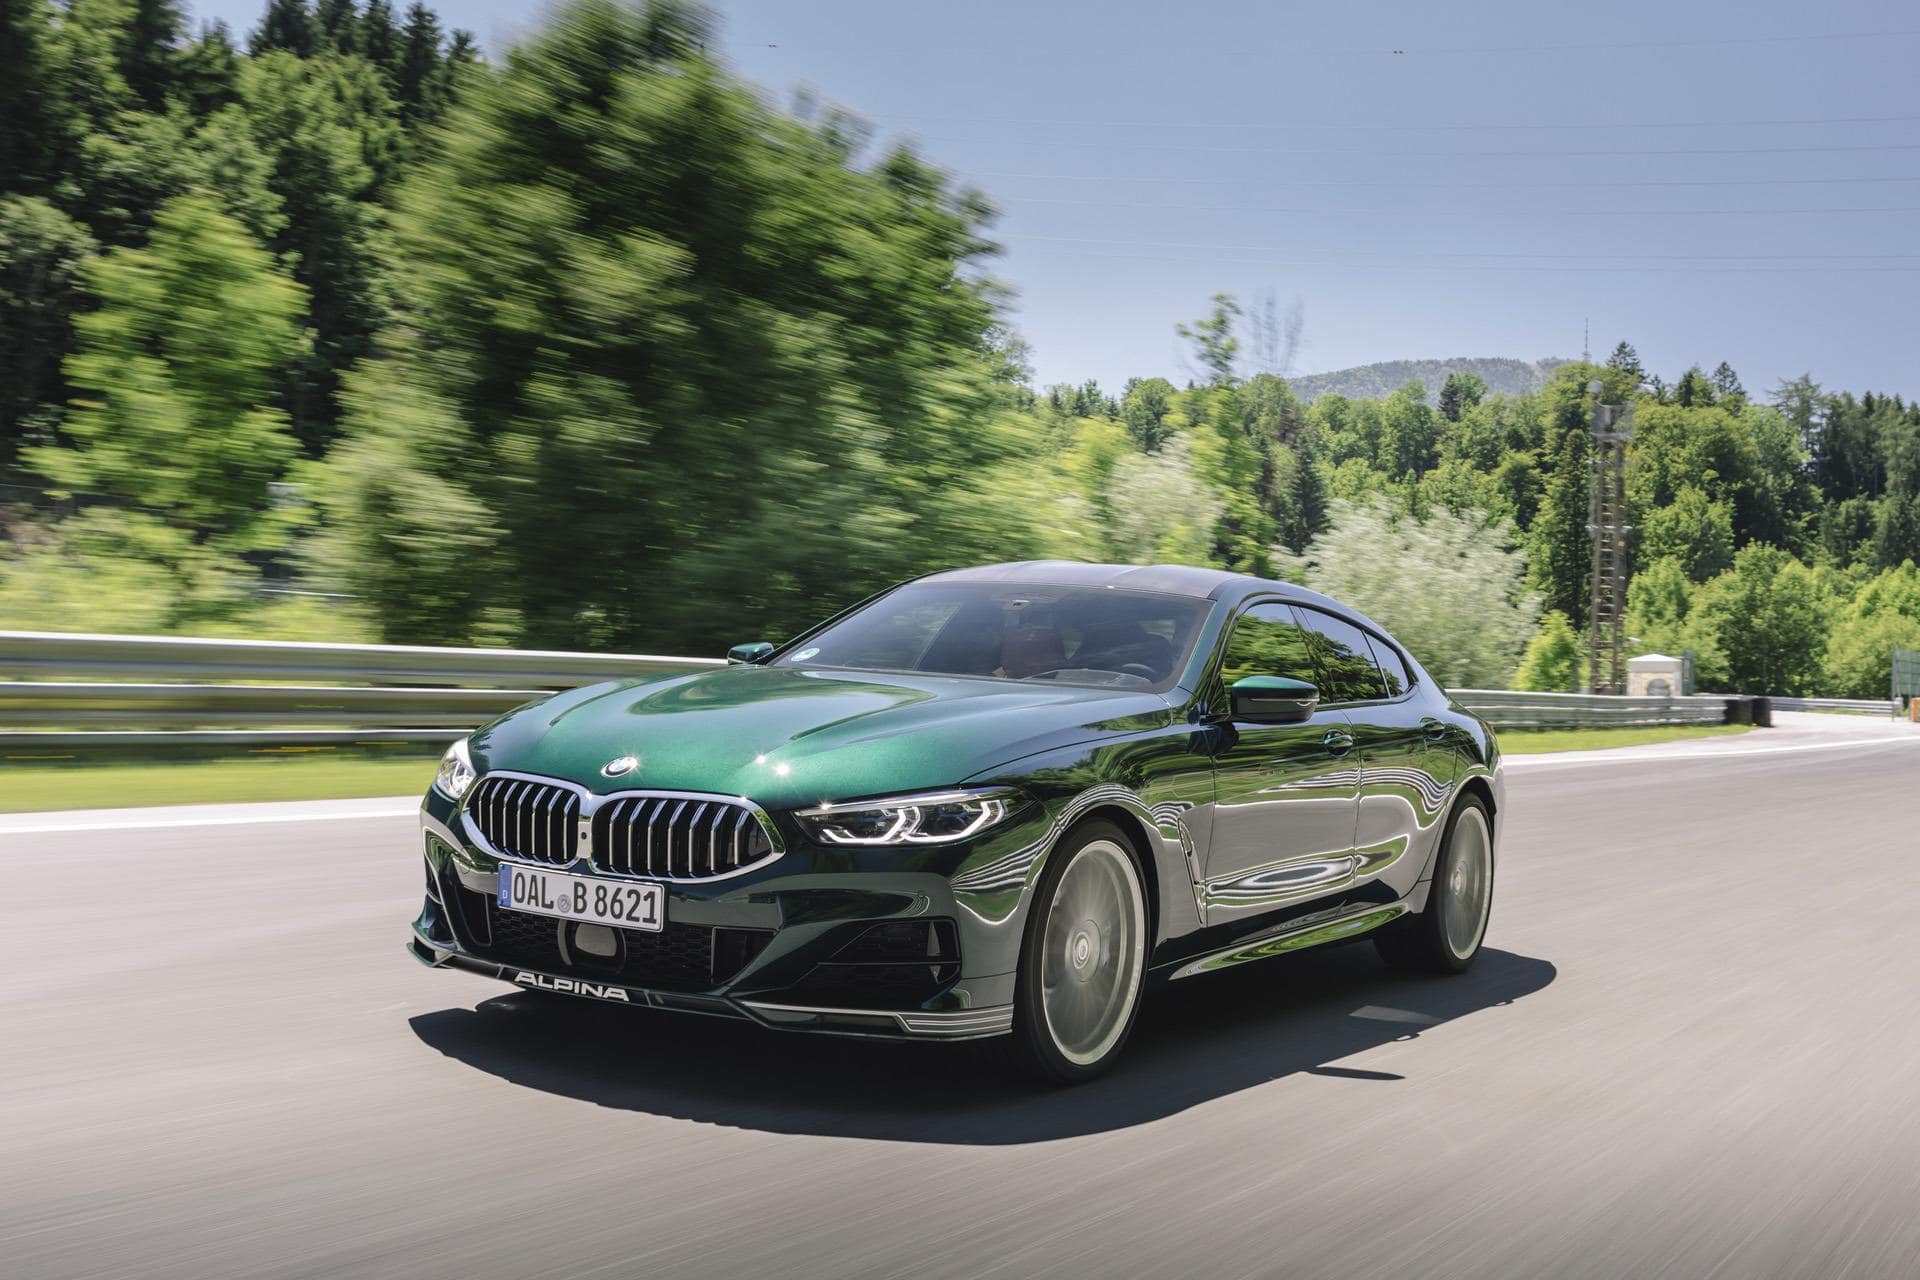 TEST DRIVE: 2021 ALPINA B8 Gran Coupe – The Elegant, Stylish and Crazy Fast Tourer